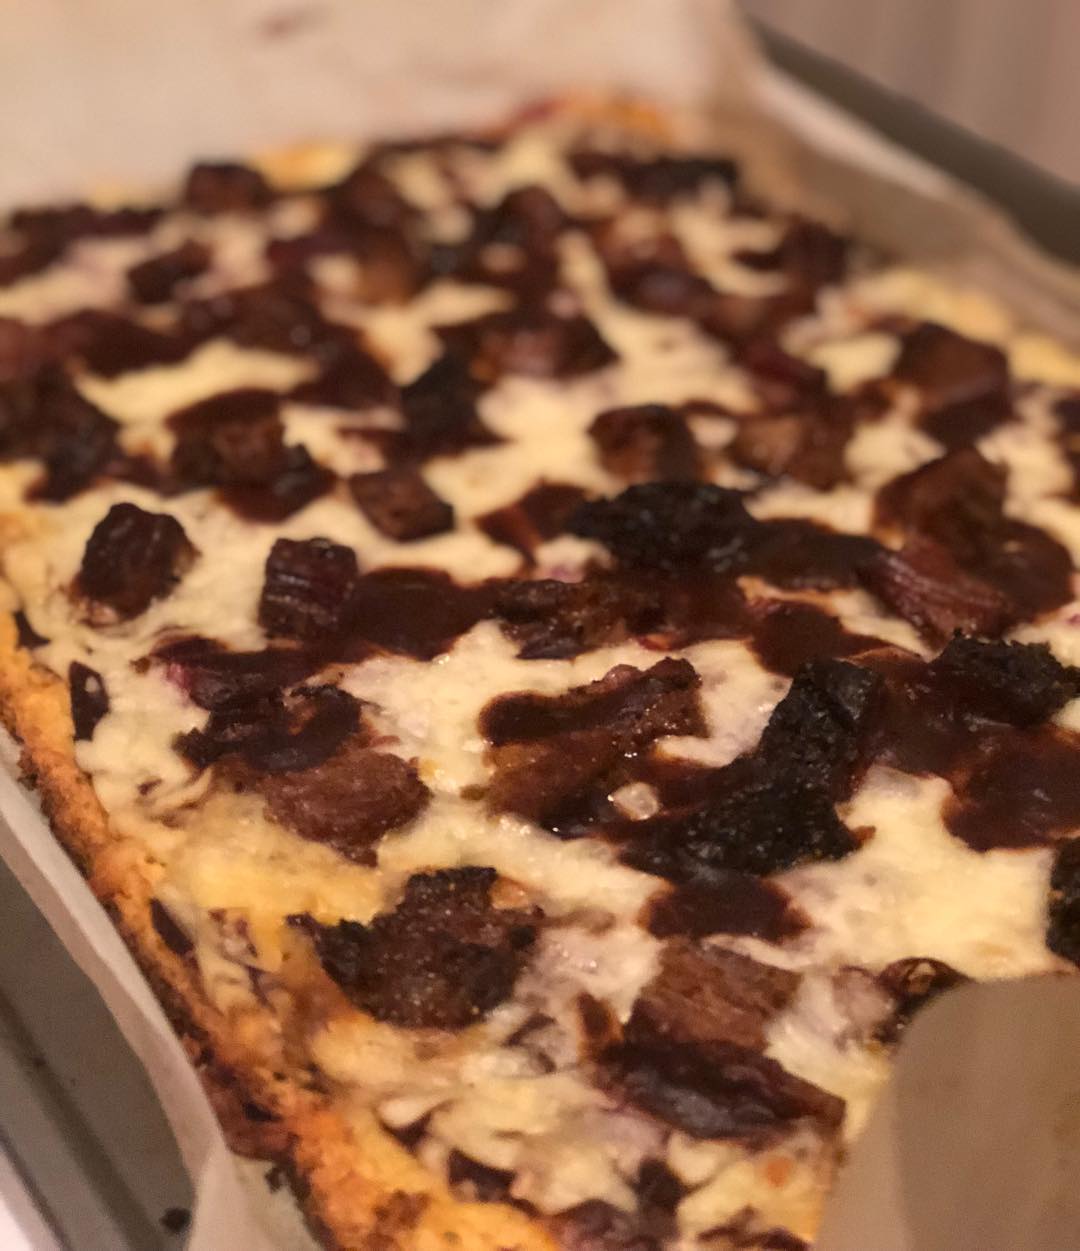 I made another Cauliflower pizza crust last night… damn this has helped make my keto life even more awesome! Check out the recipe I posted a few posts back- it’s totally worth it to make